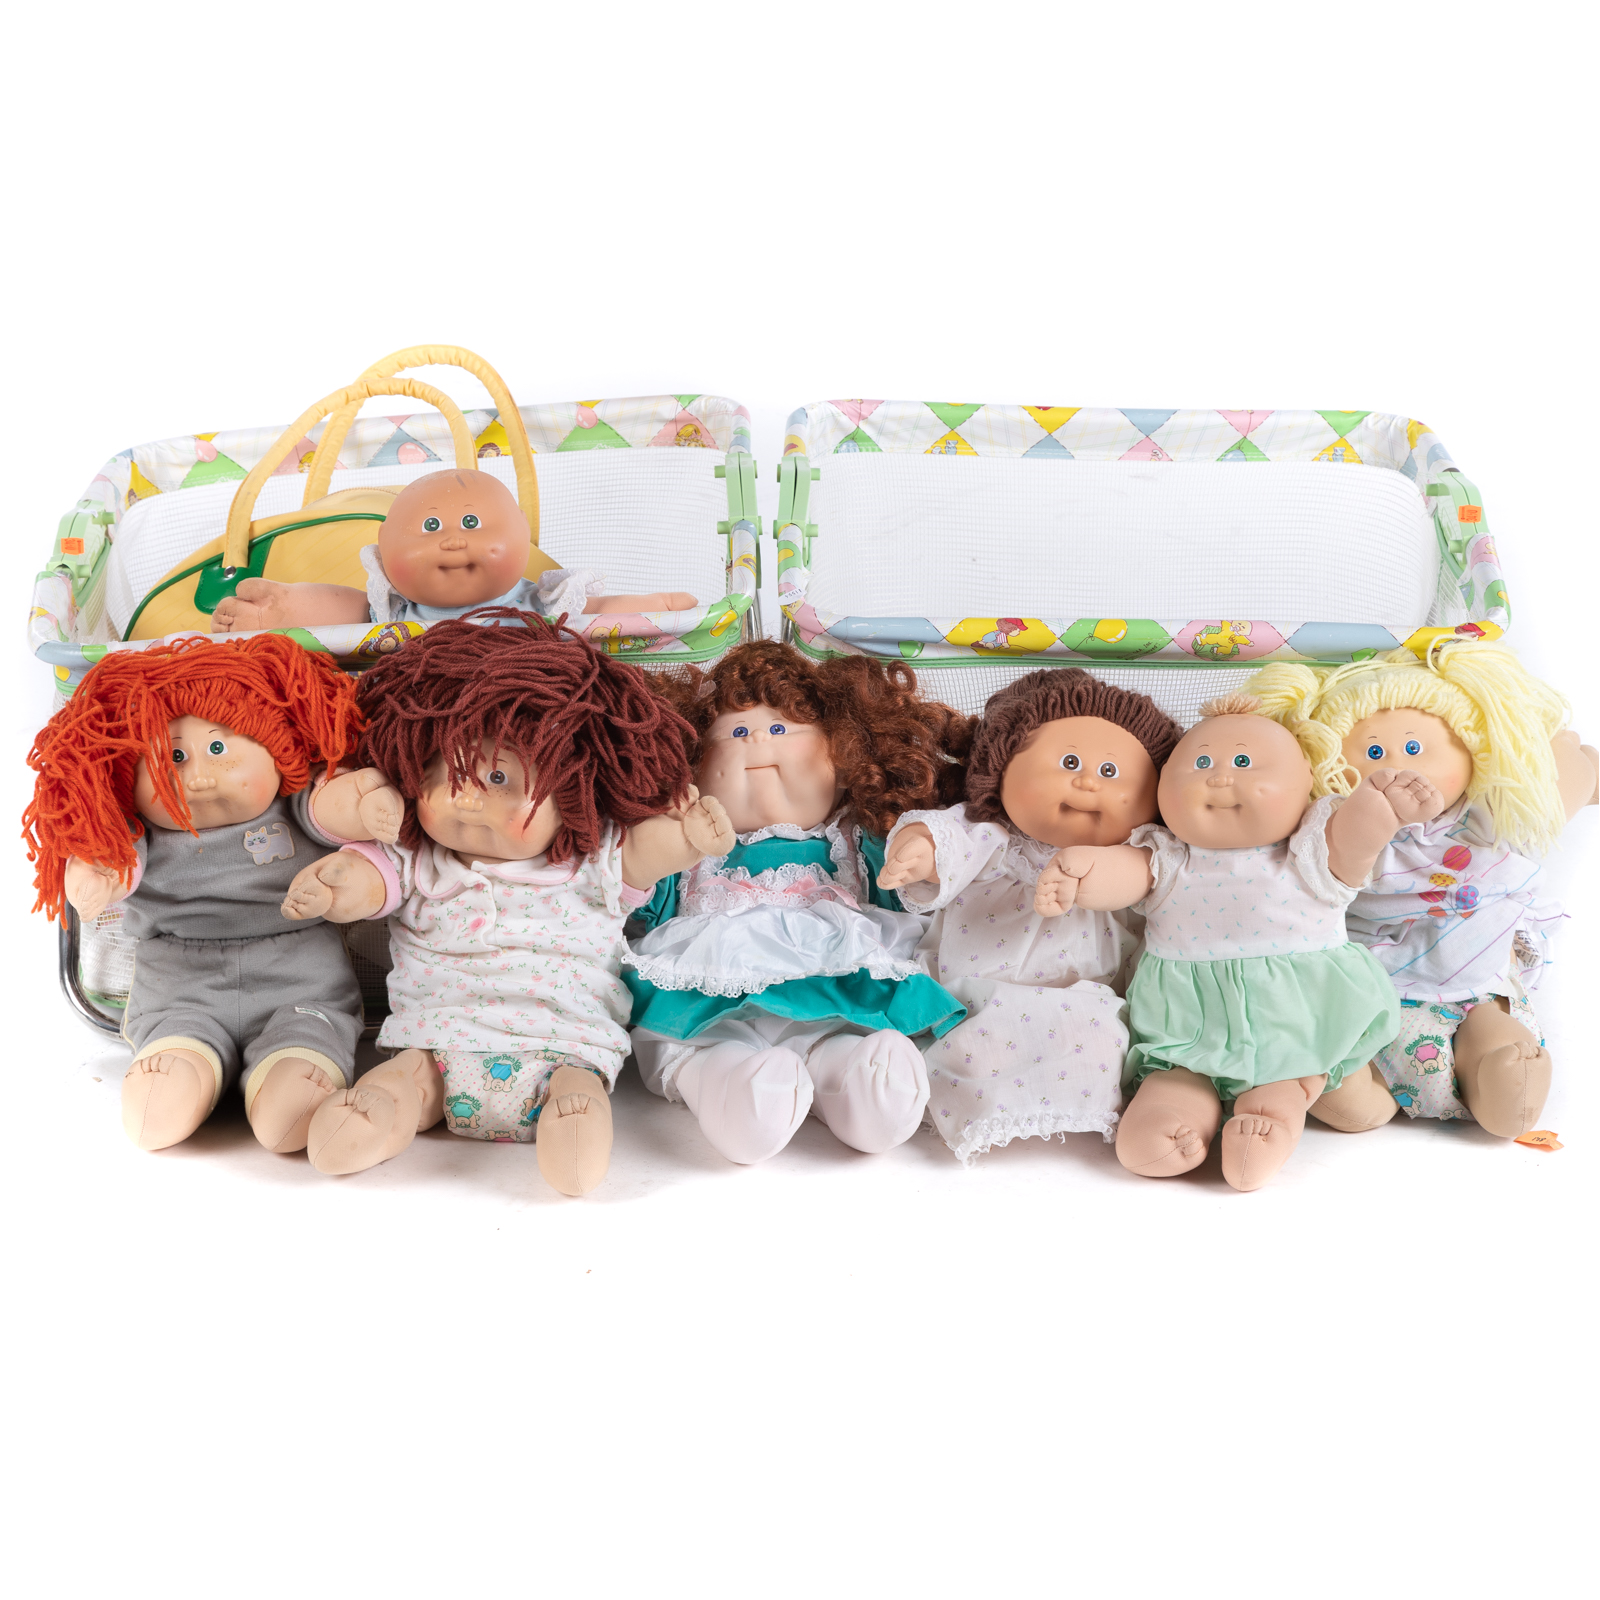 SEVEN CABBAGE PATCH KIDS & ACCESSORIES